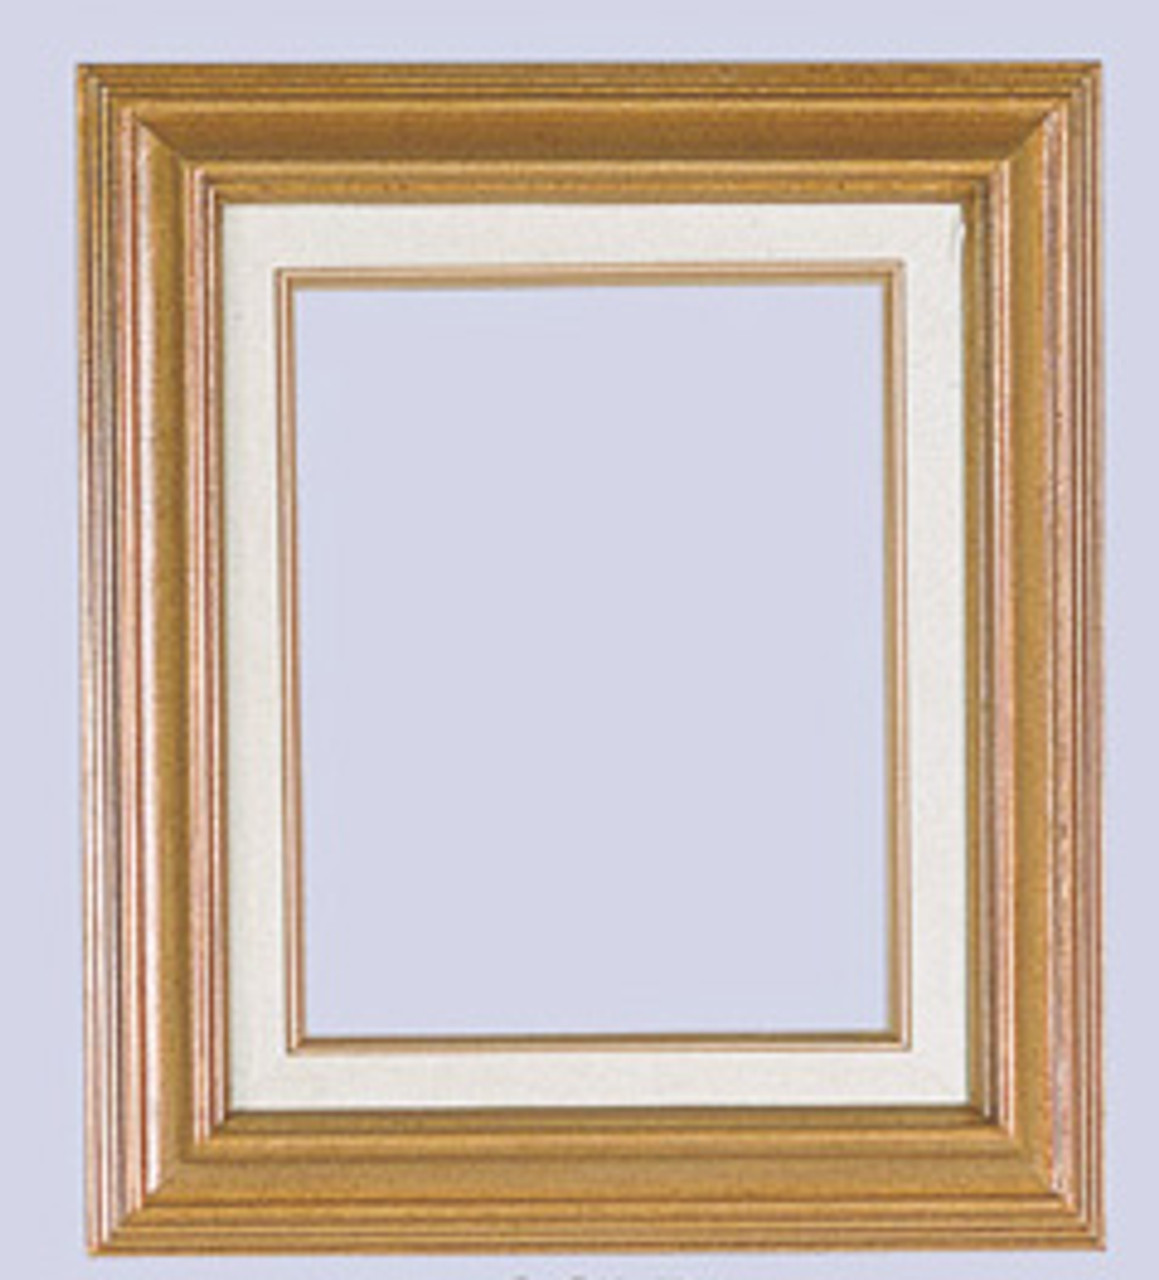 3 Inch Econo Wood Frames With Linen Liners: 7X9